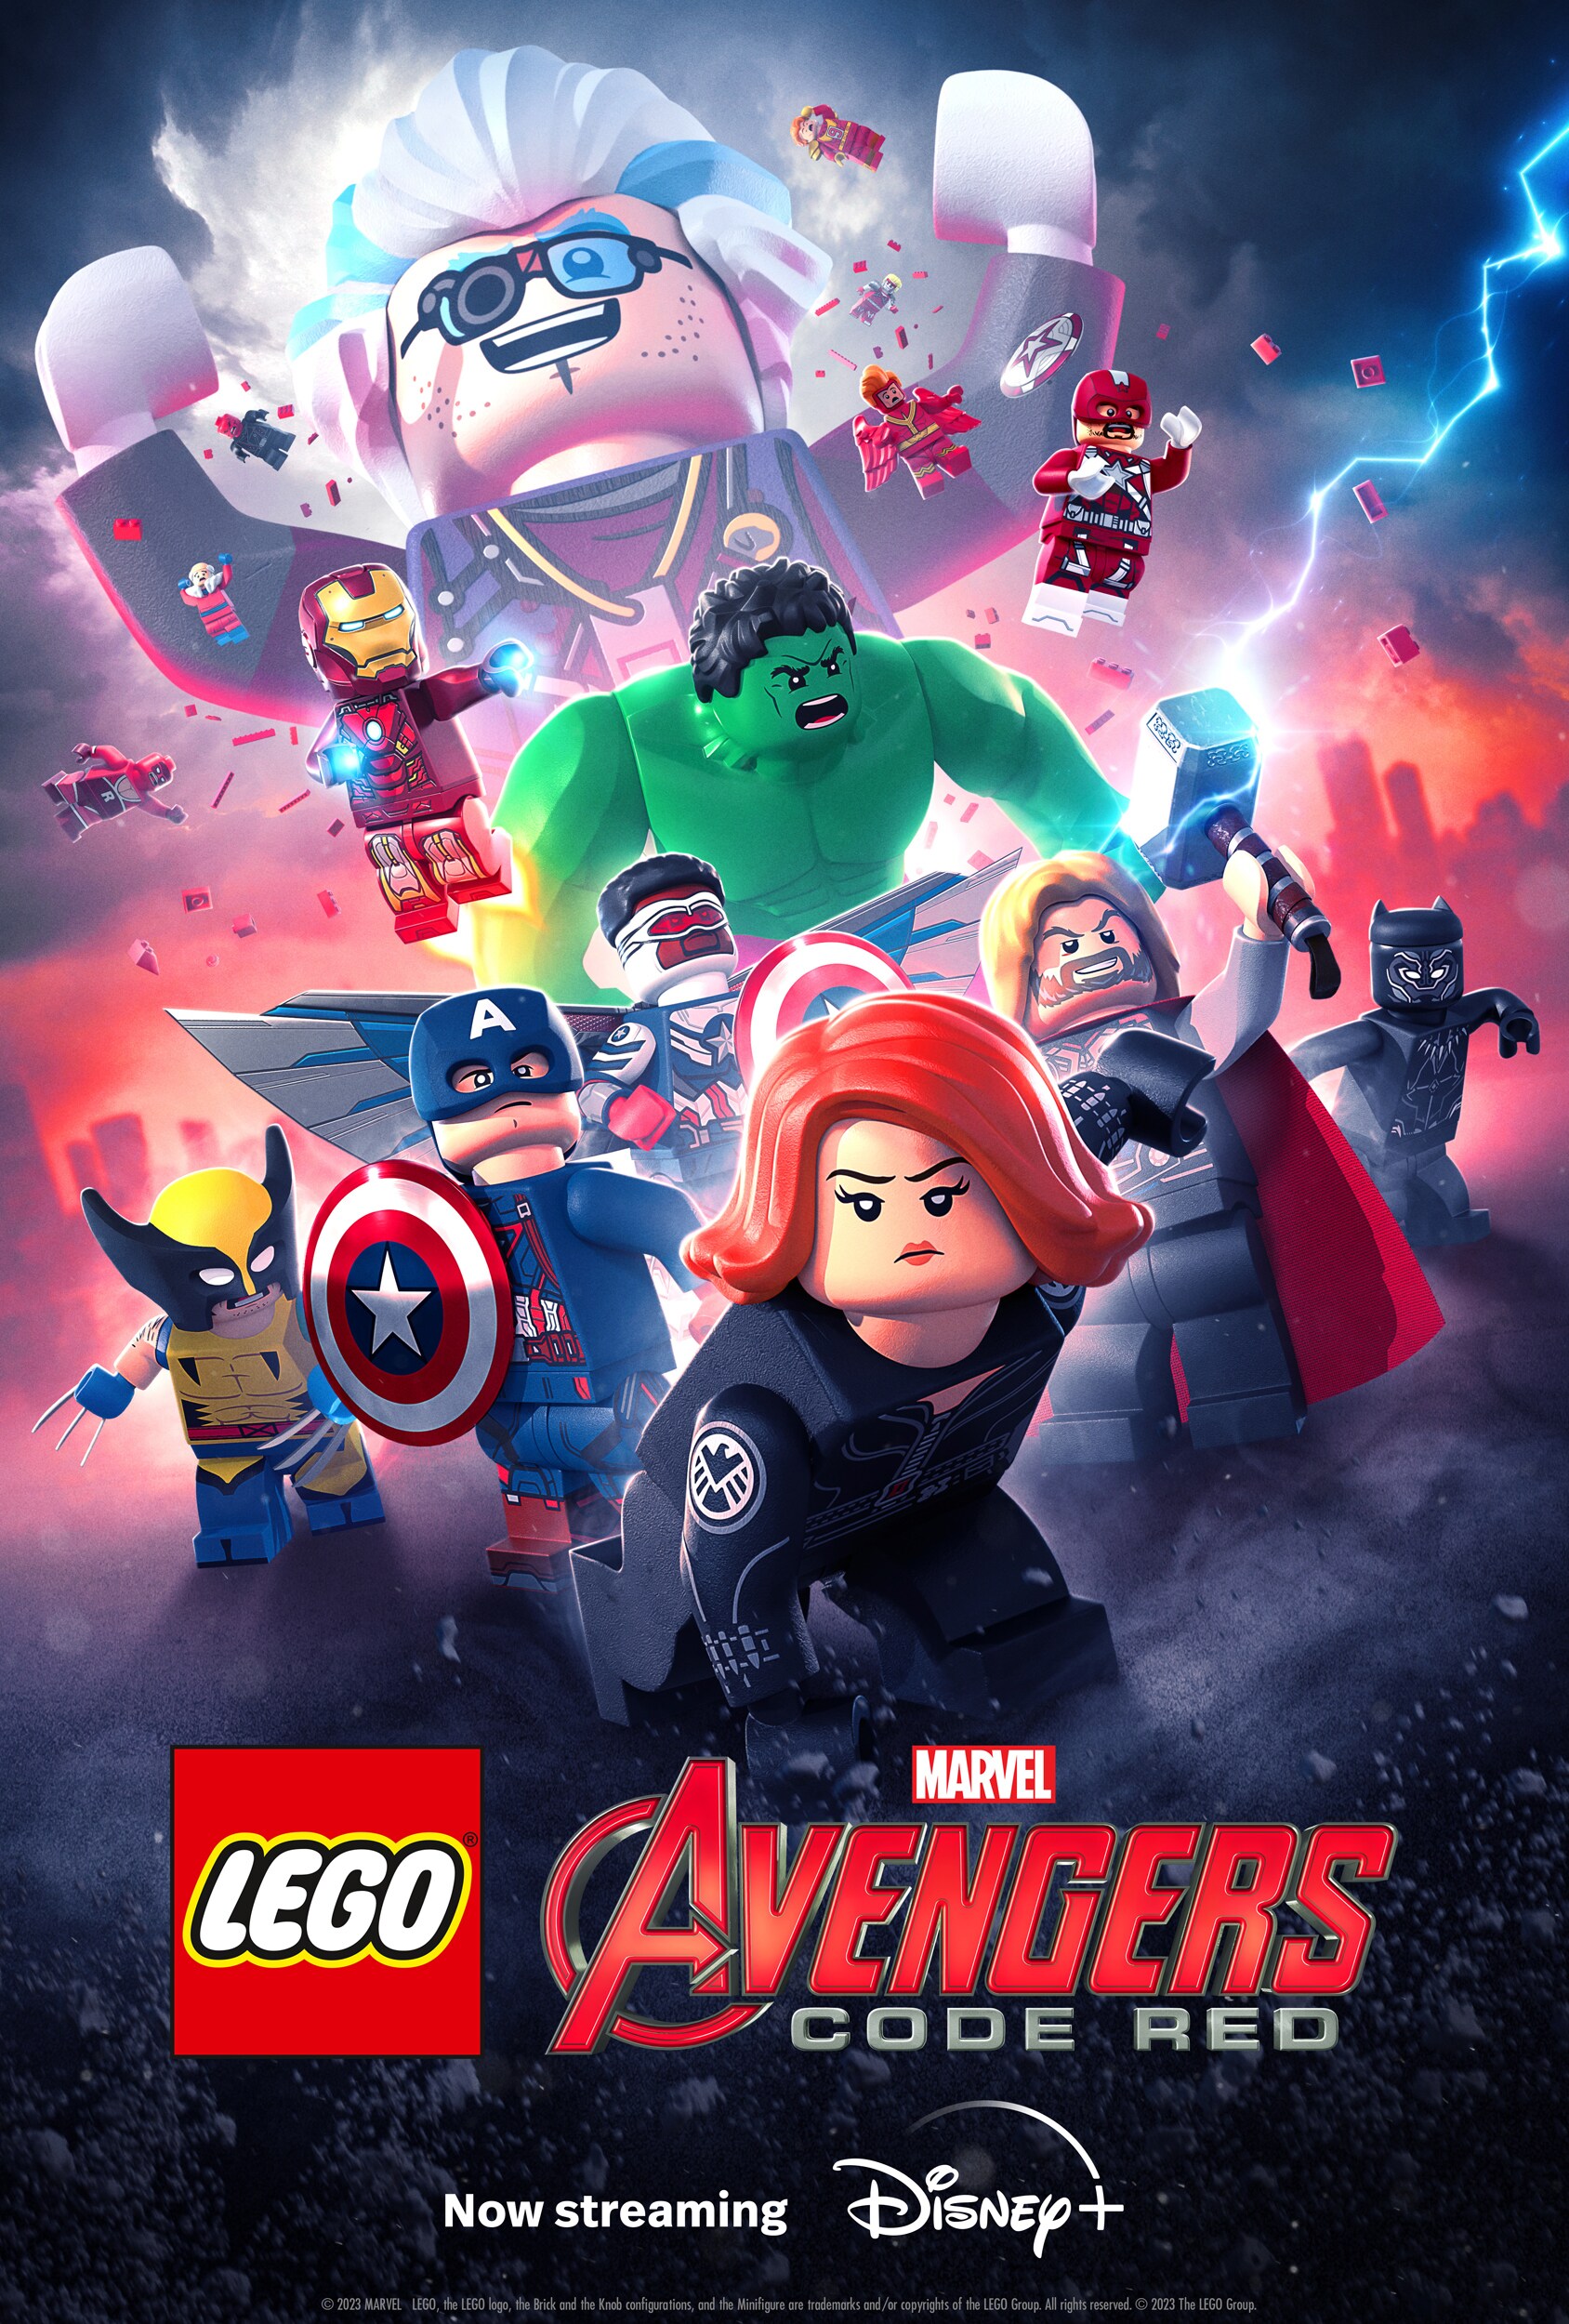 Super heroes assemble in new LEGO Marvel Collection